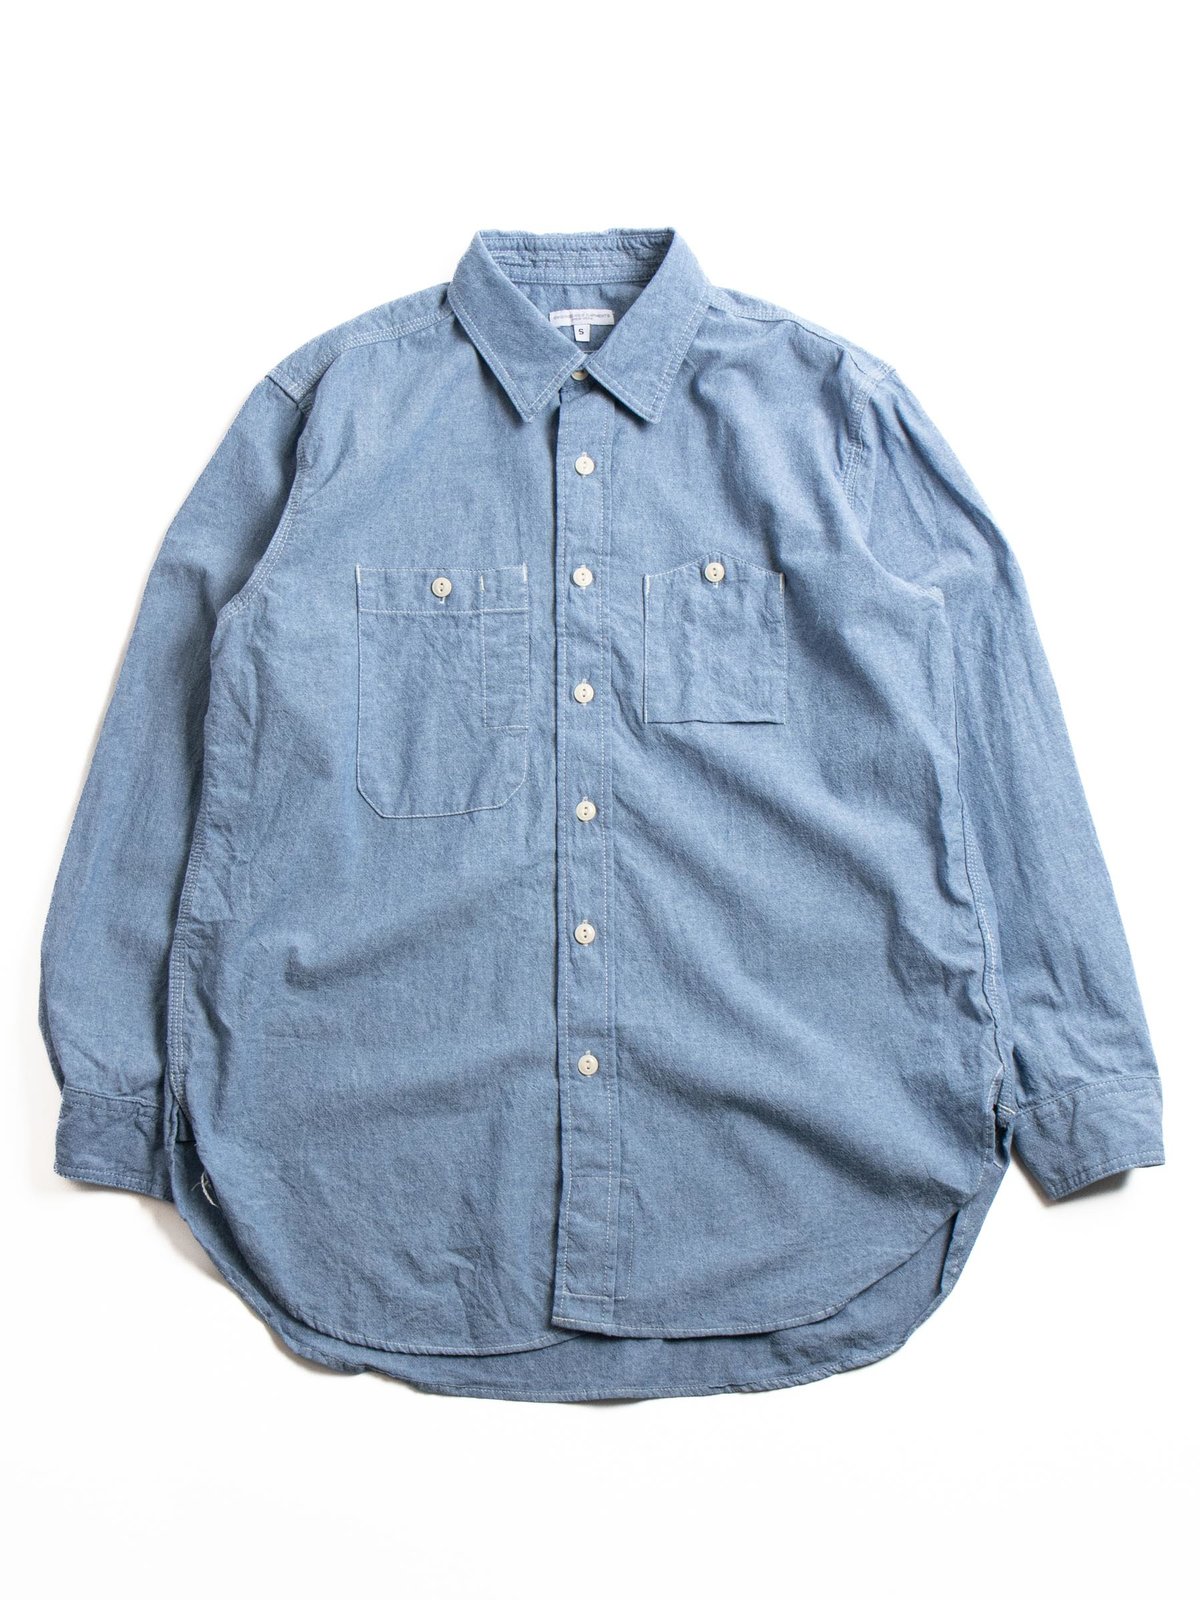 WORK SHIRT LT.BLUE 4.5oz COTTON CHAMBRAY by Engineered Garments – The ...